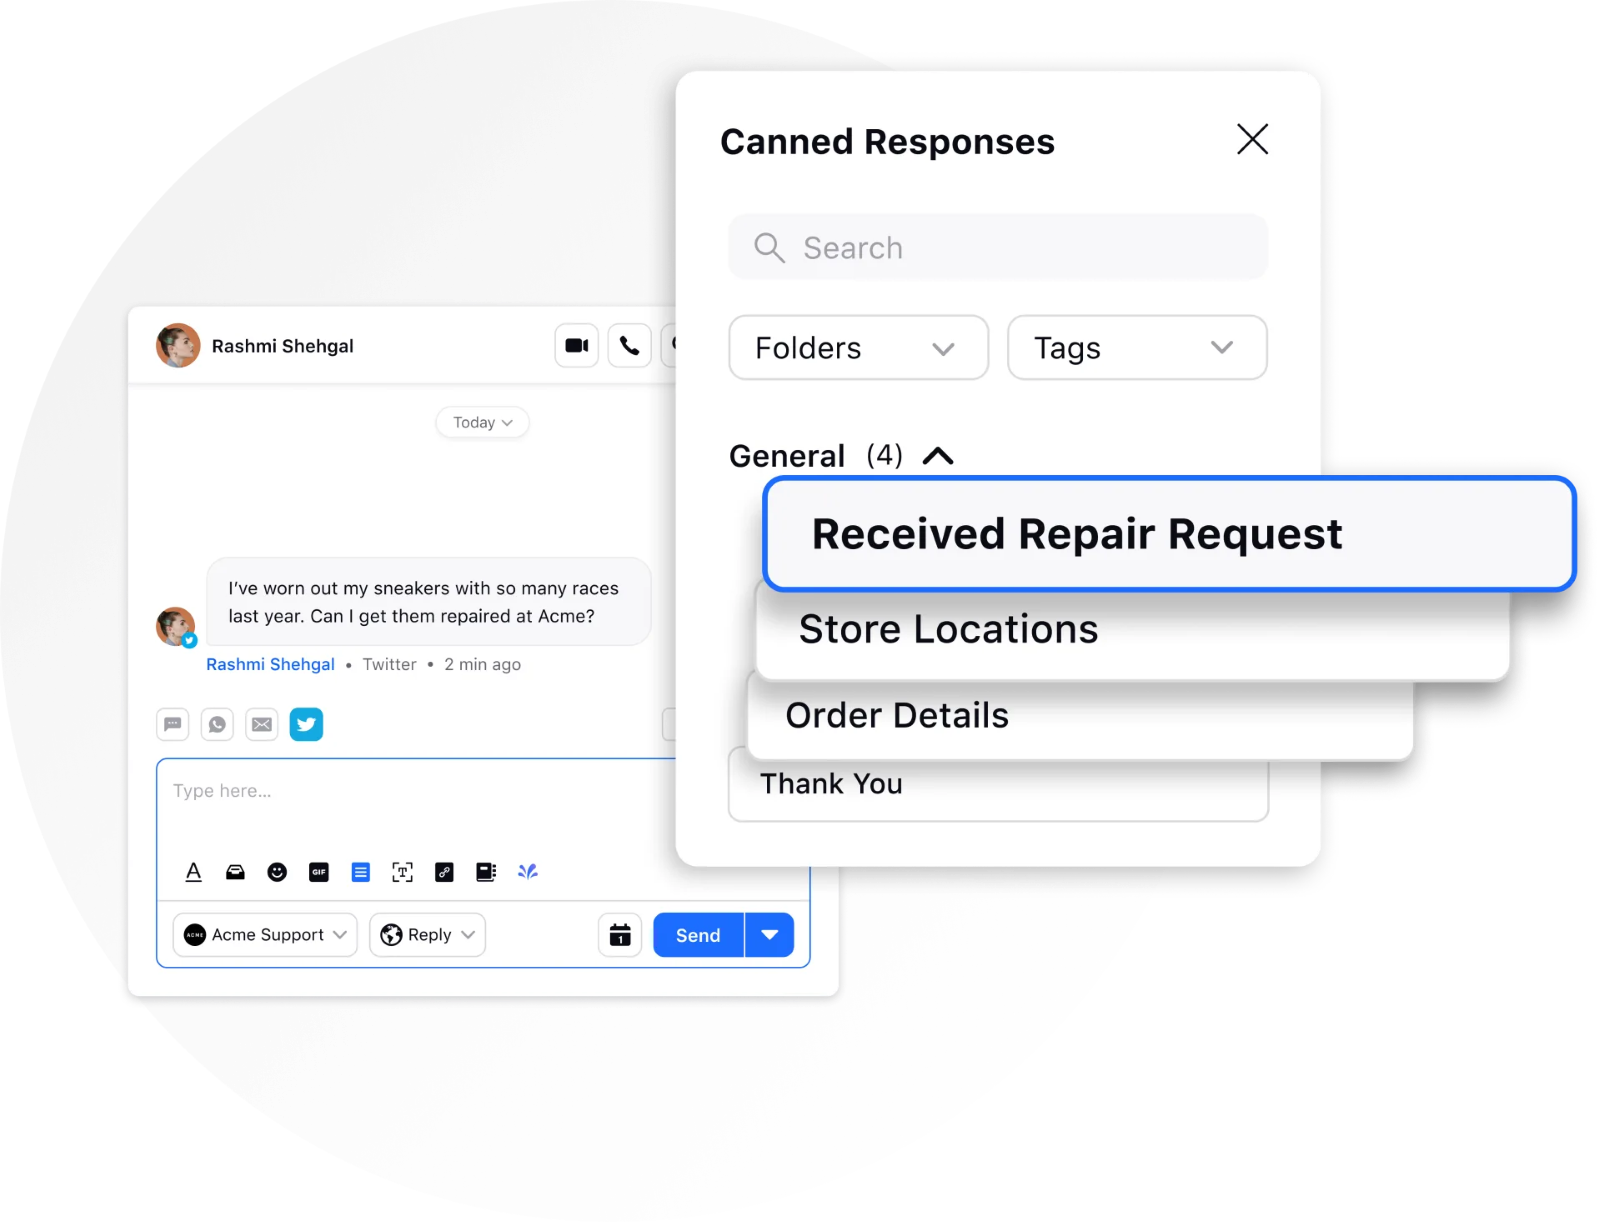 General canned responses for common queries on Sprinklr